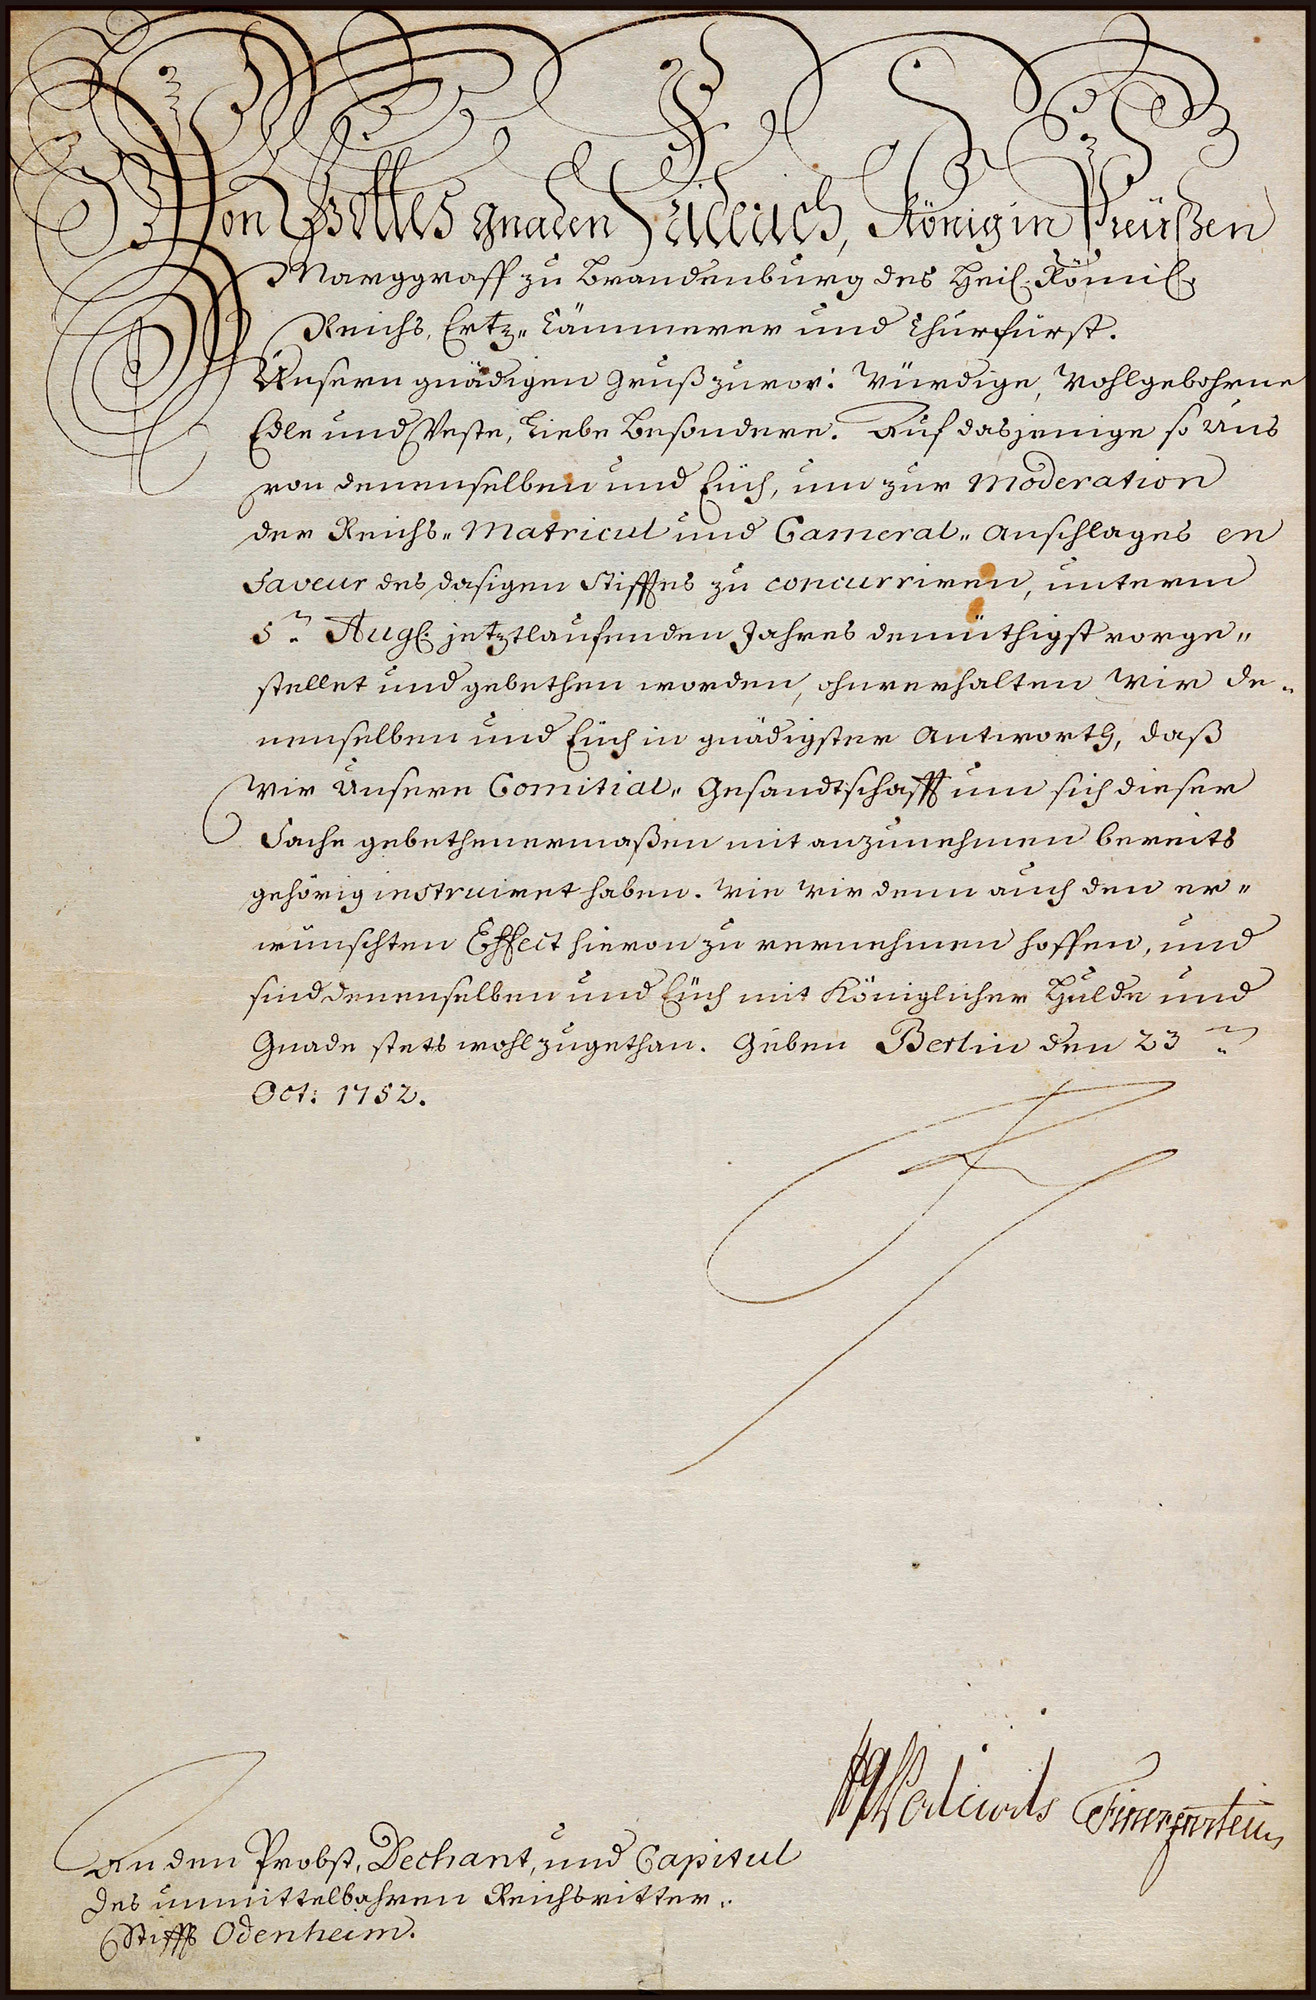 The document signed by Frederick the Great in 1752, “the representative of European enlightened despotism and enlightenment”, with certificate